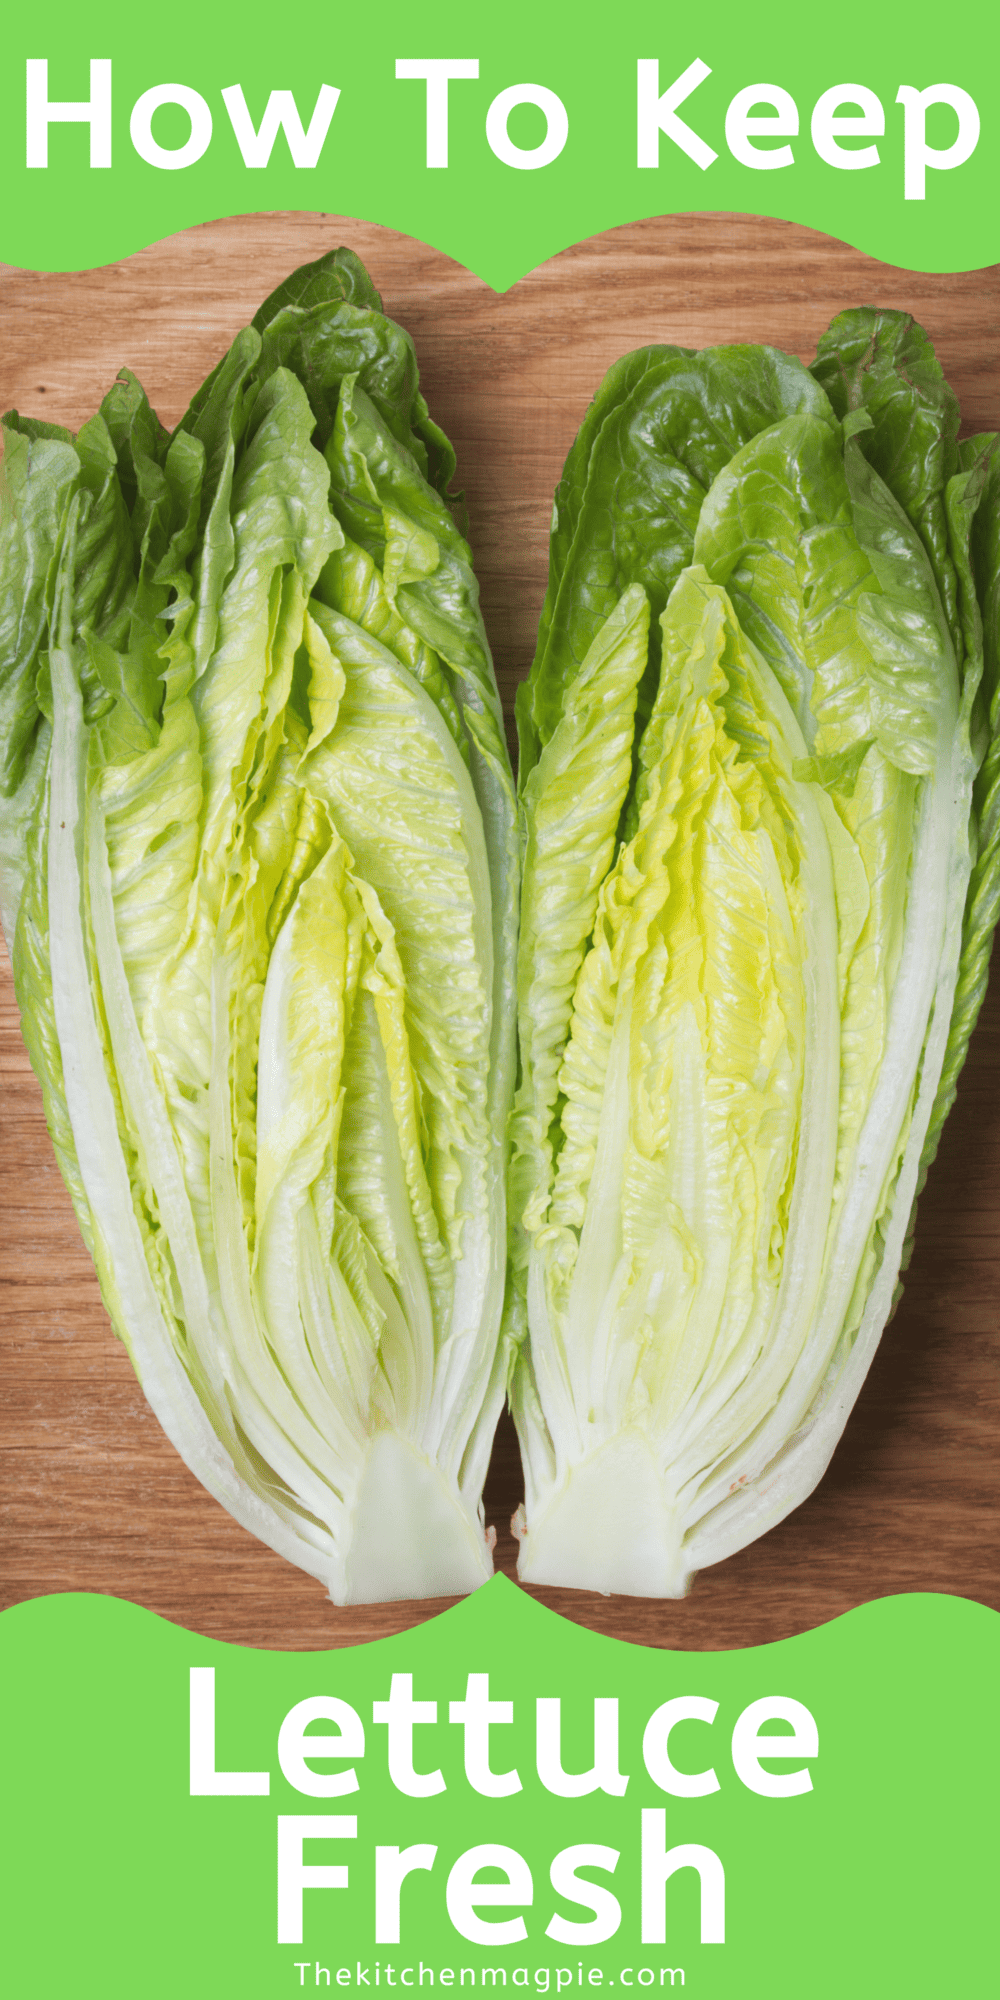 Easy ways to keep your lettuce fresh for as long as you can to make great salads and sandwiches for lunches.